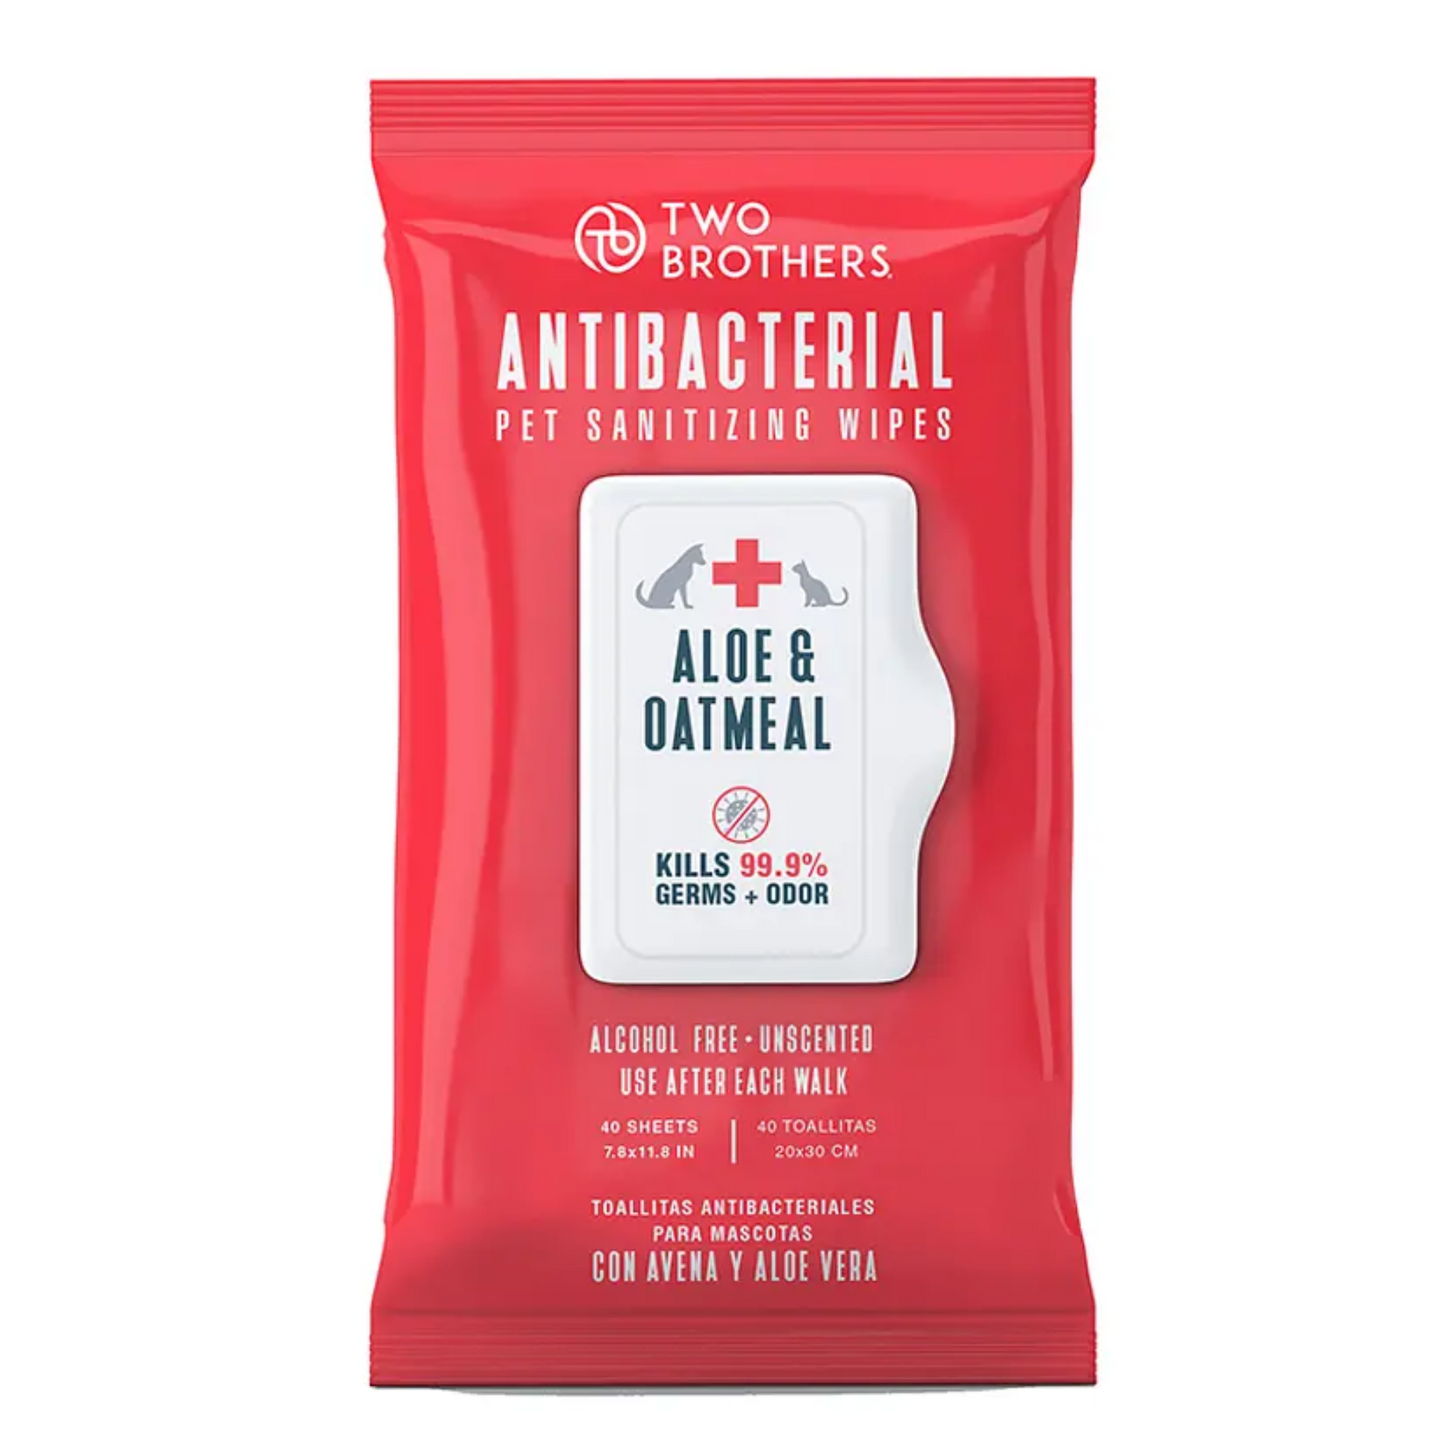 Two Brothers Antibacterial Wipes - 40 toallitas